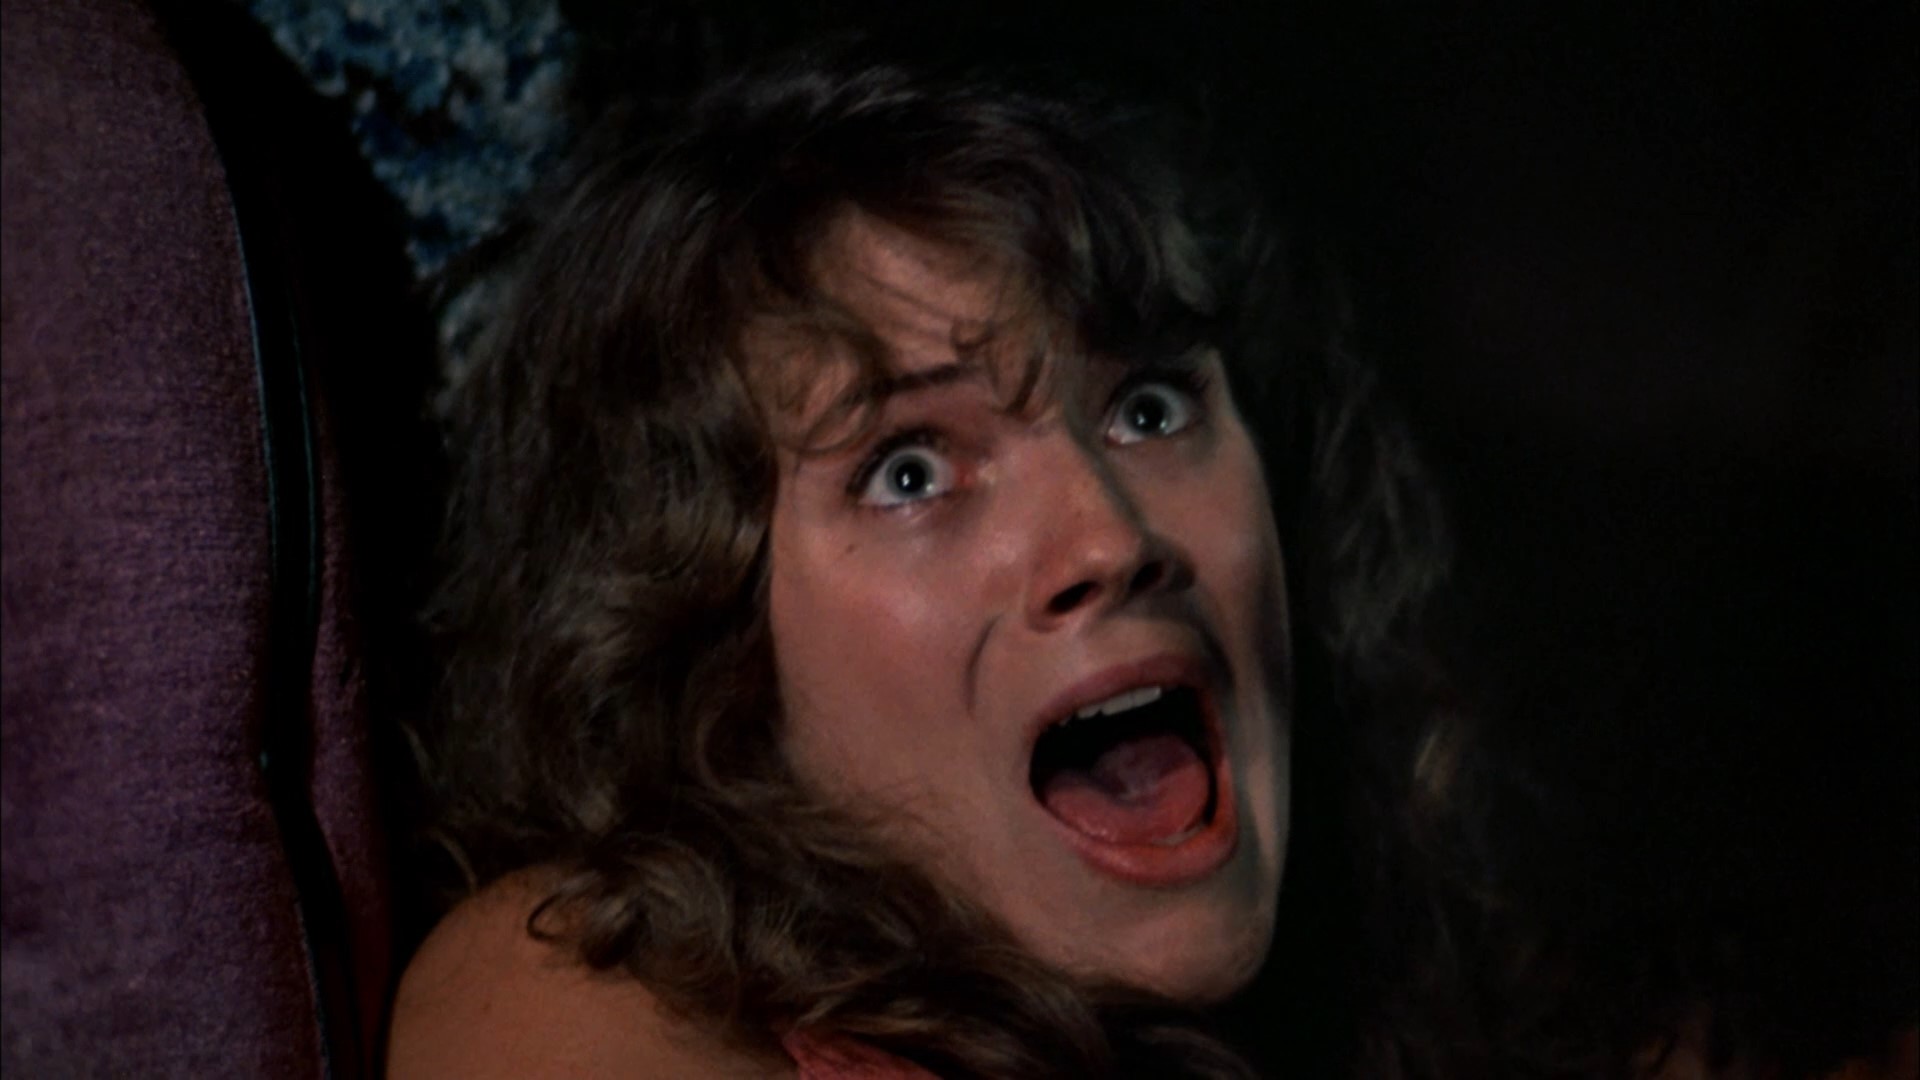 THE HOUSE ON SORORITY ROW (1983) (MVD Rewind Collection Blu-ray Review...